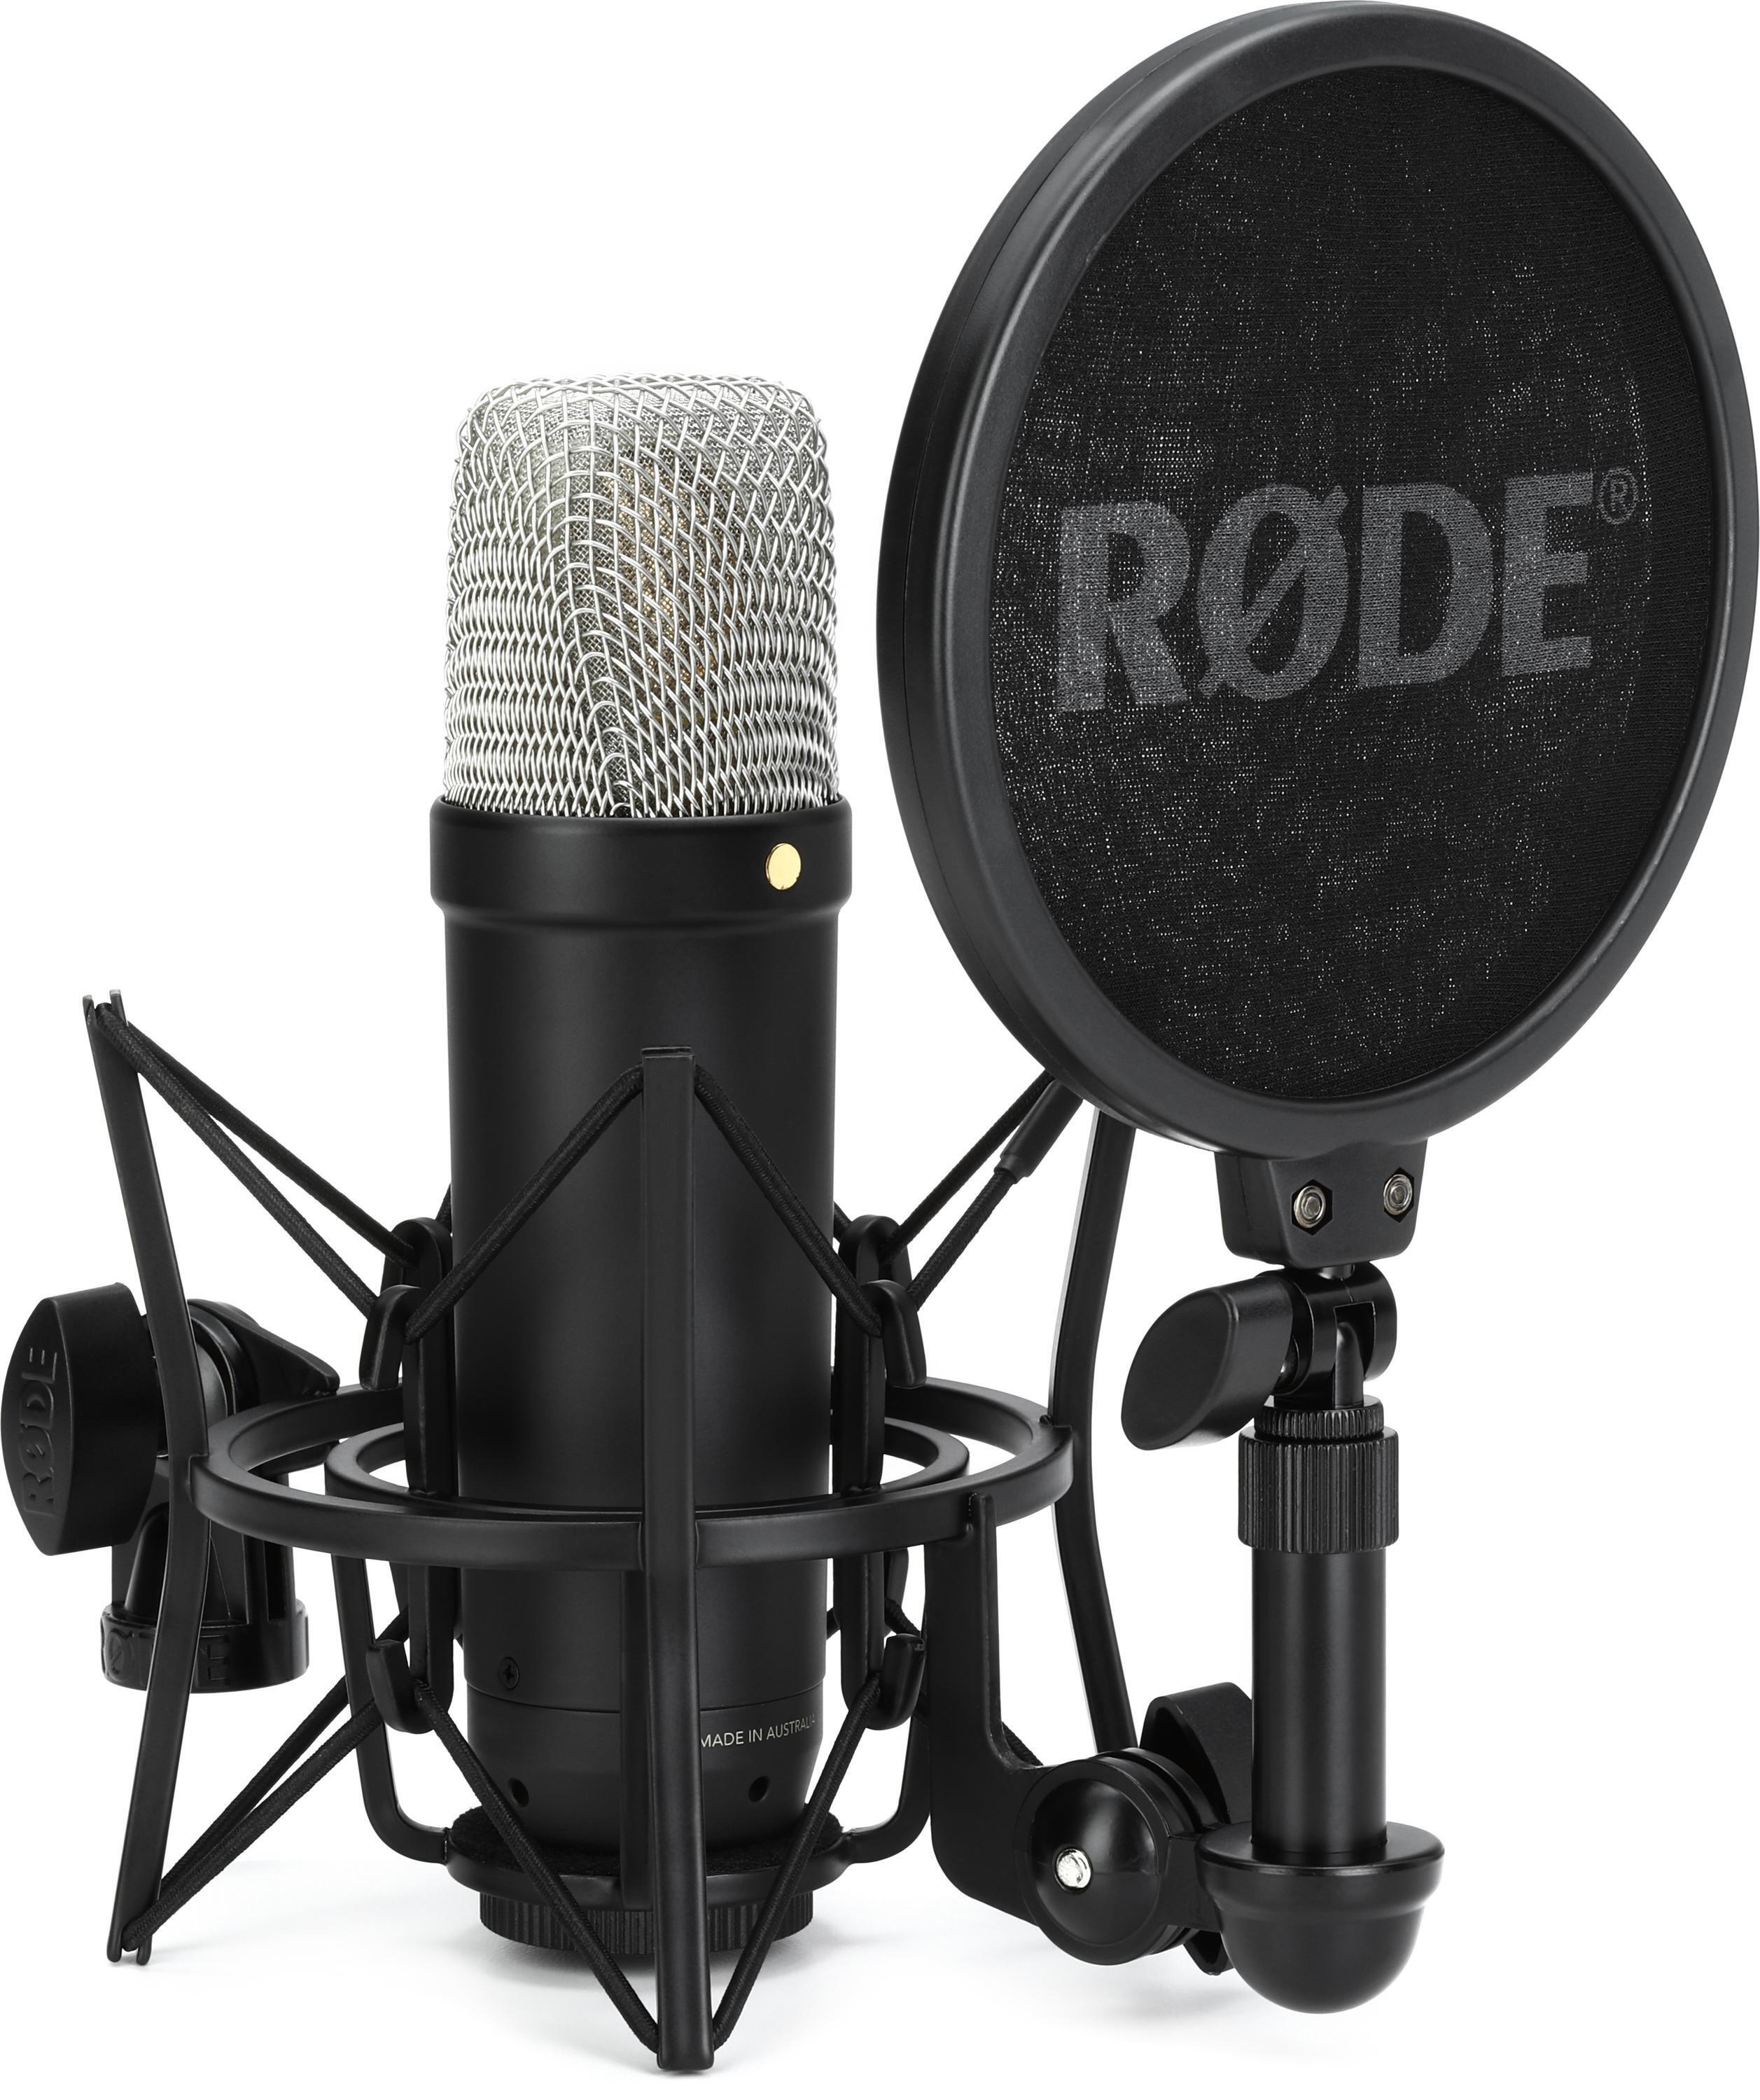 Rode NT1 5th Generation Condenser Microphone with SM6 Shockmount